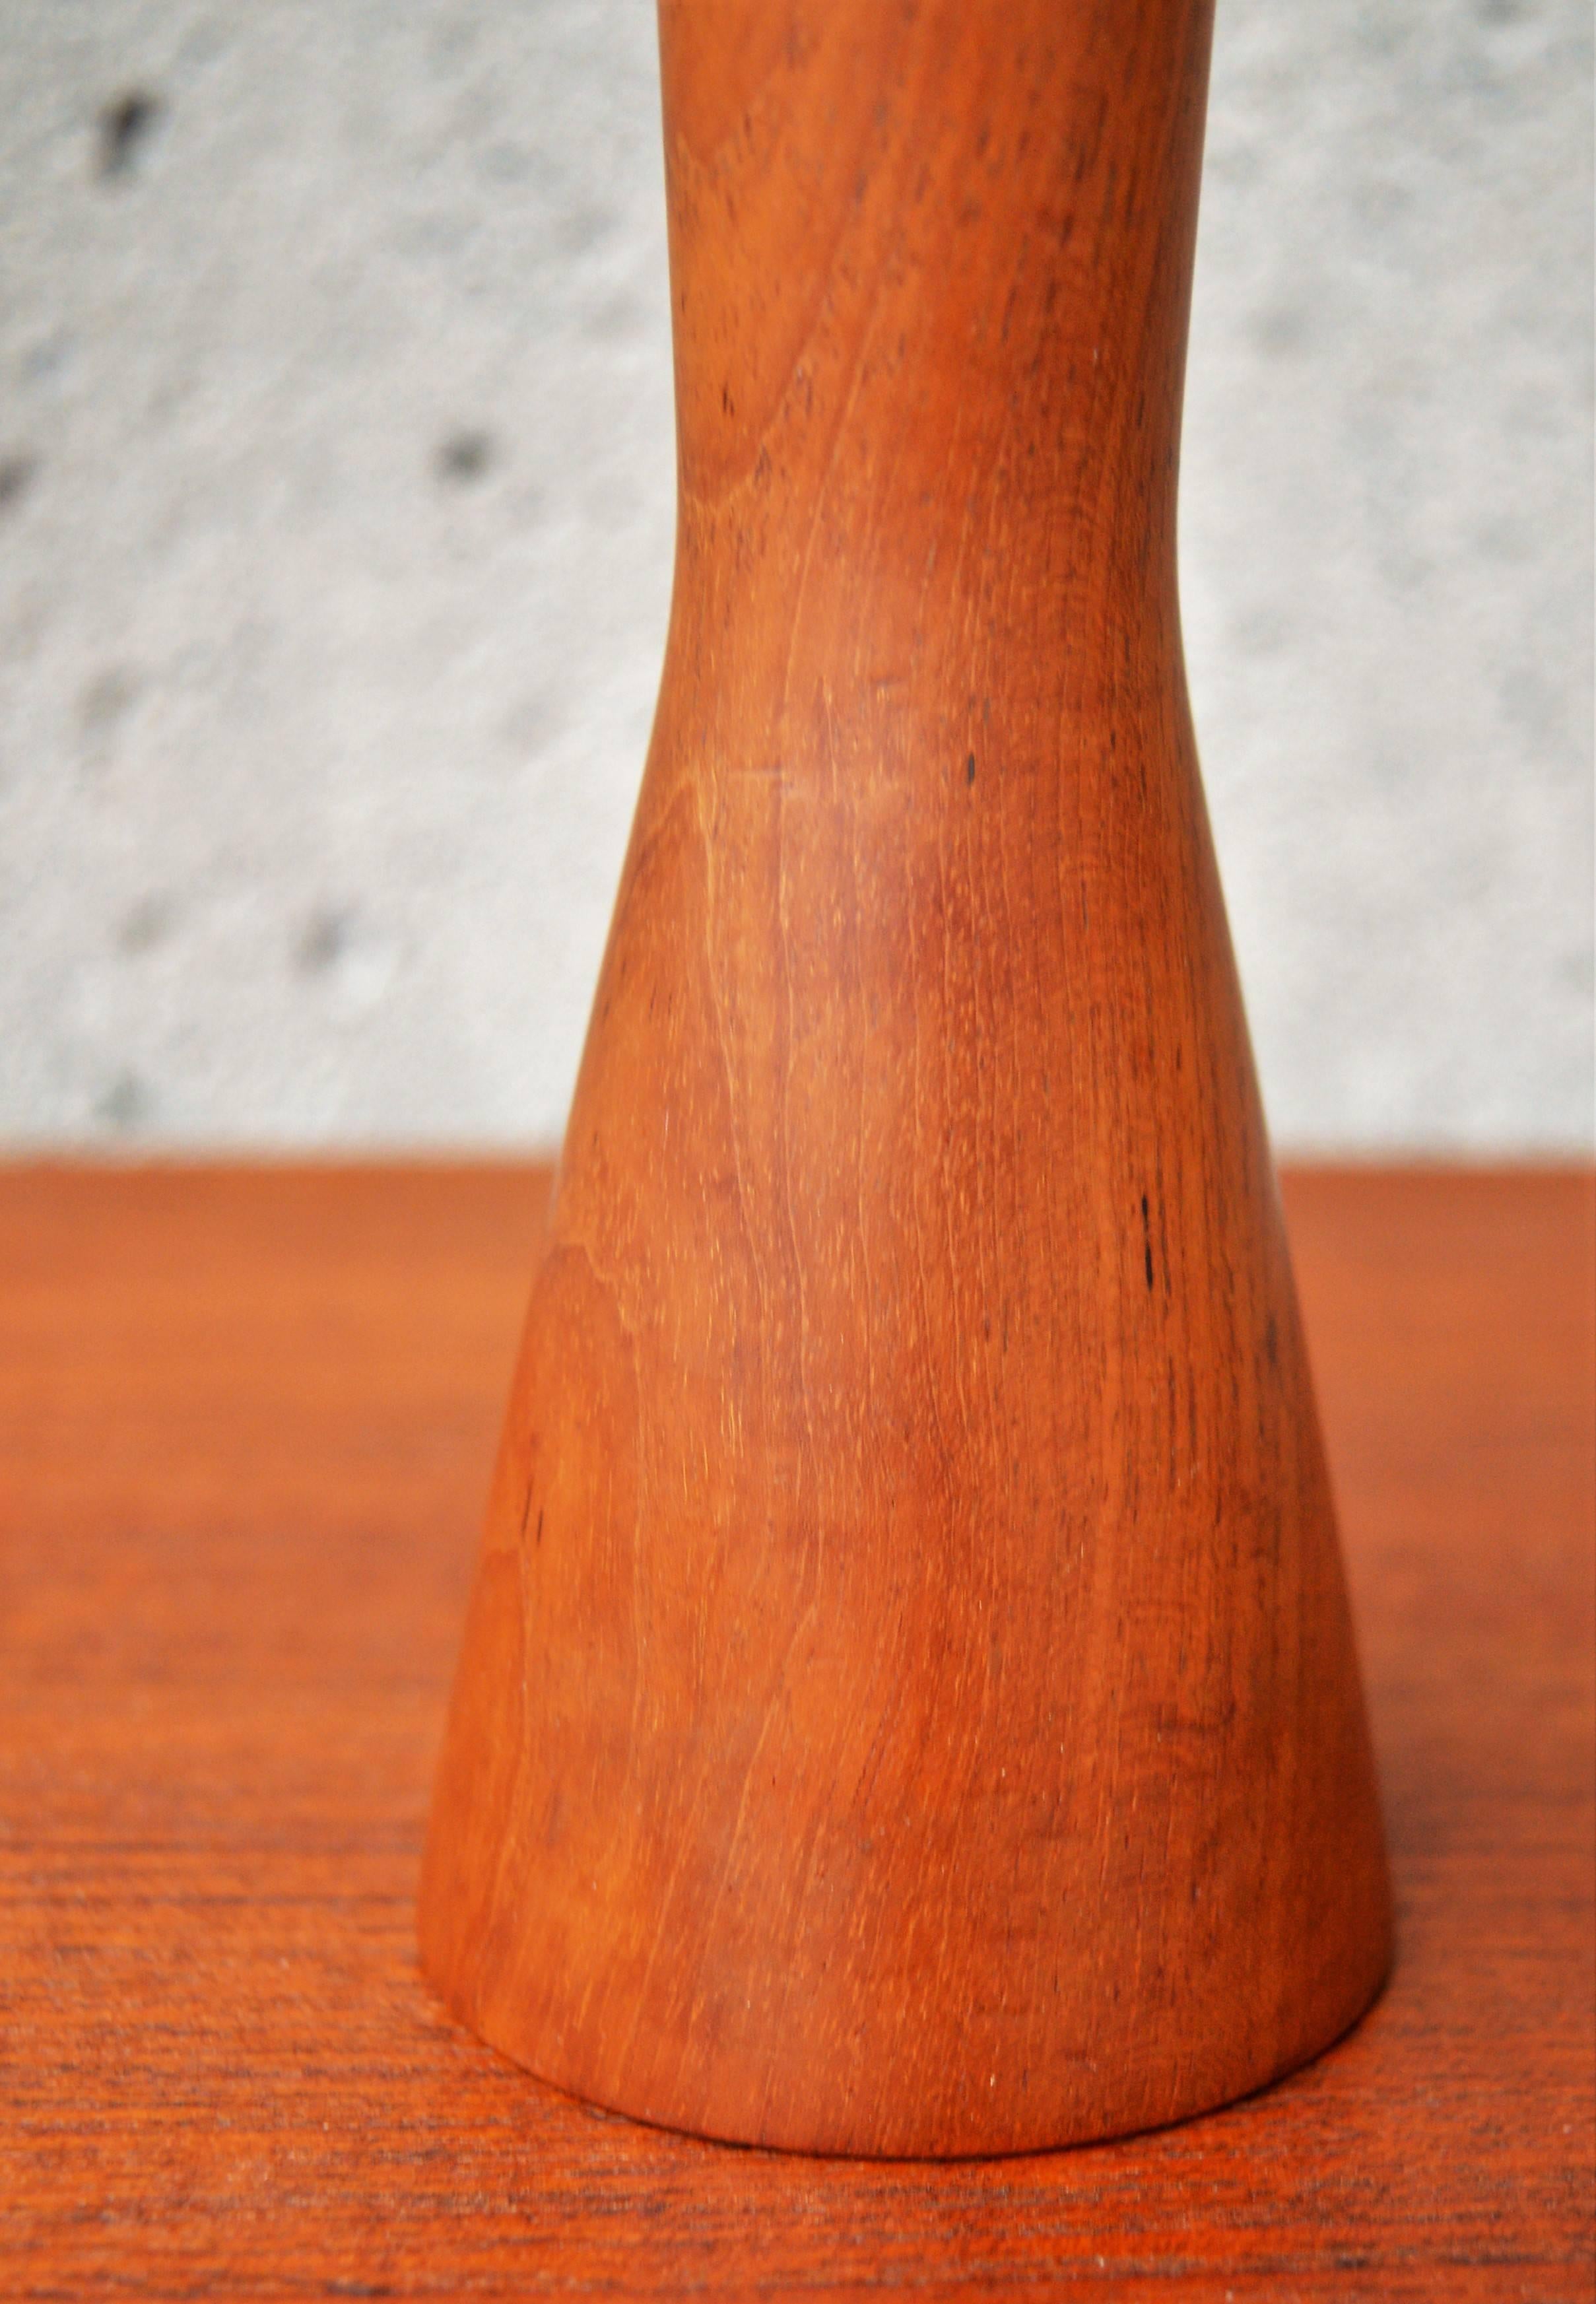 This lovely and rare peppermill was designed by Alf Hansen for P. Broste, Denmark. It is made from an hourglass shaped teak base with a zebrawood top. The steel grinding mechanism was made if France. Perfect as a centerpiece on the dinner table and